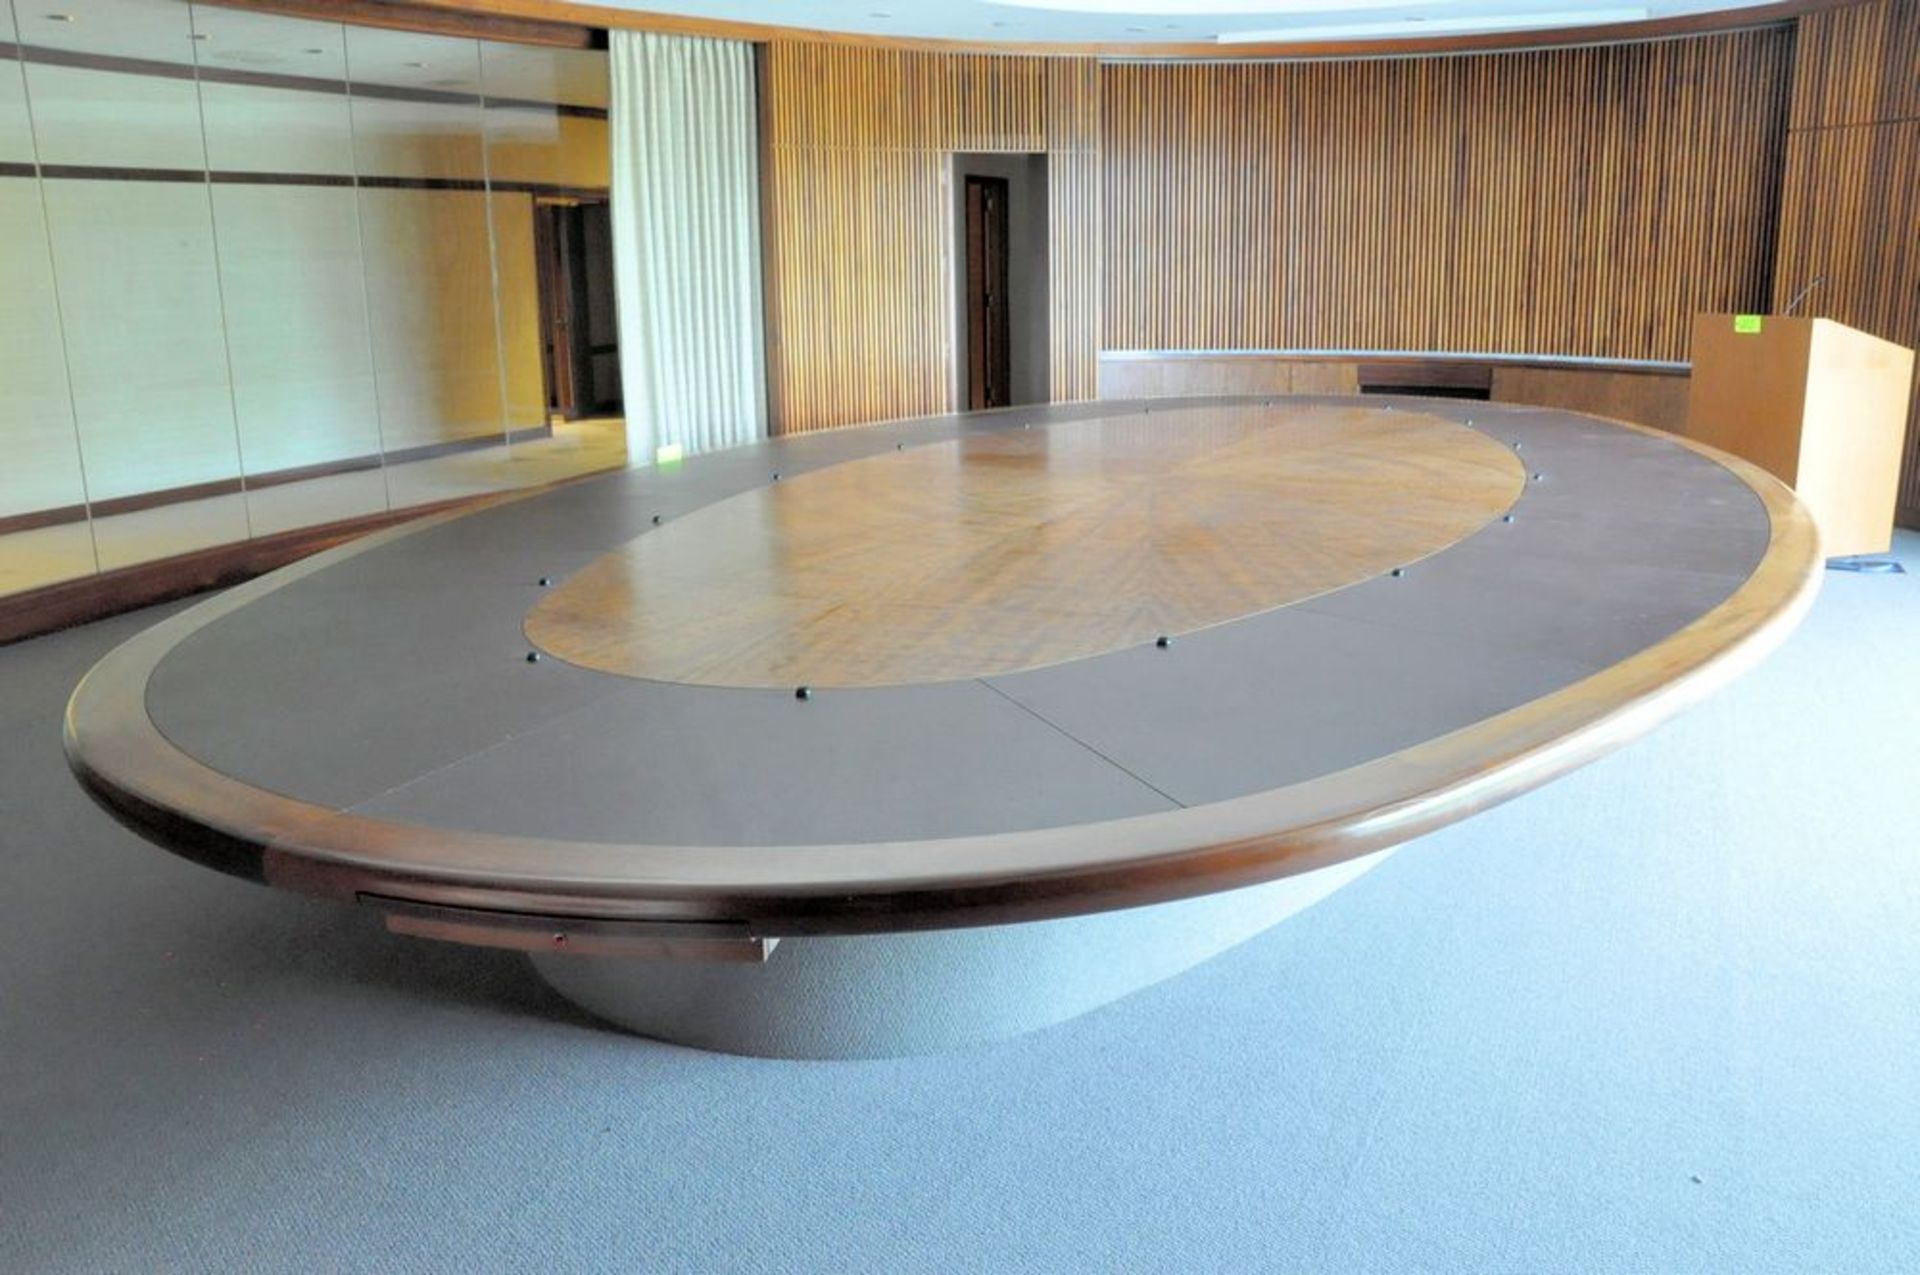 14' 4" x 25' Oval Conference Table, with (1) Portable Podium, (TR3-214A), (3rd Floor)